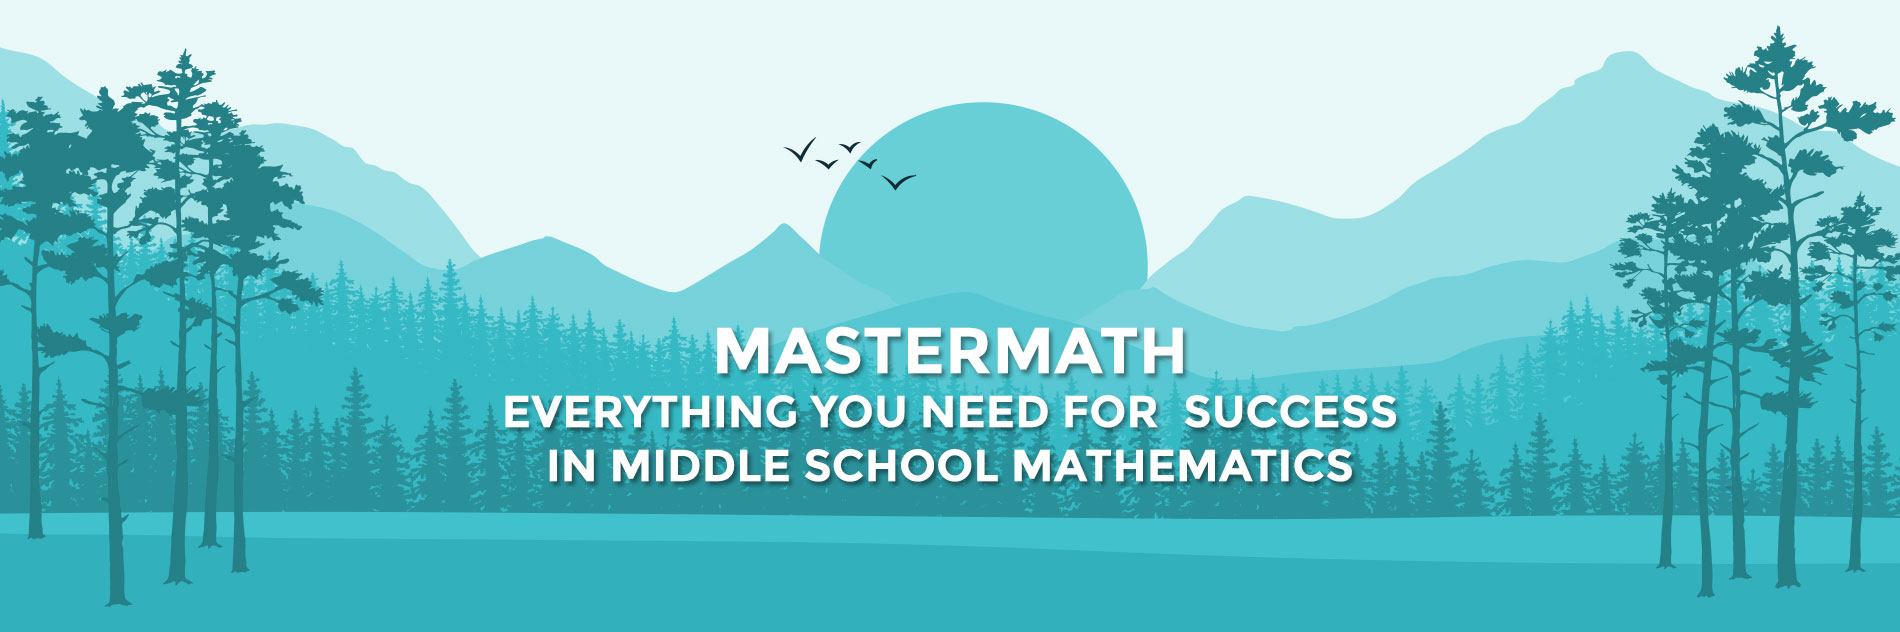 EVERYTHING YOU NEED FOR  SUCCESS 
IN MIDDLE SCHOOL MATHEMATICS